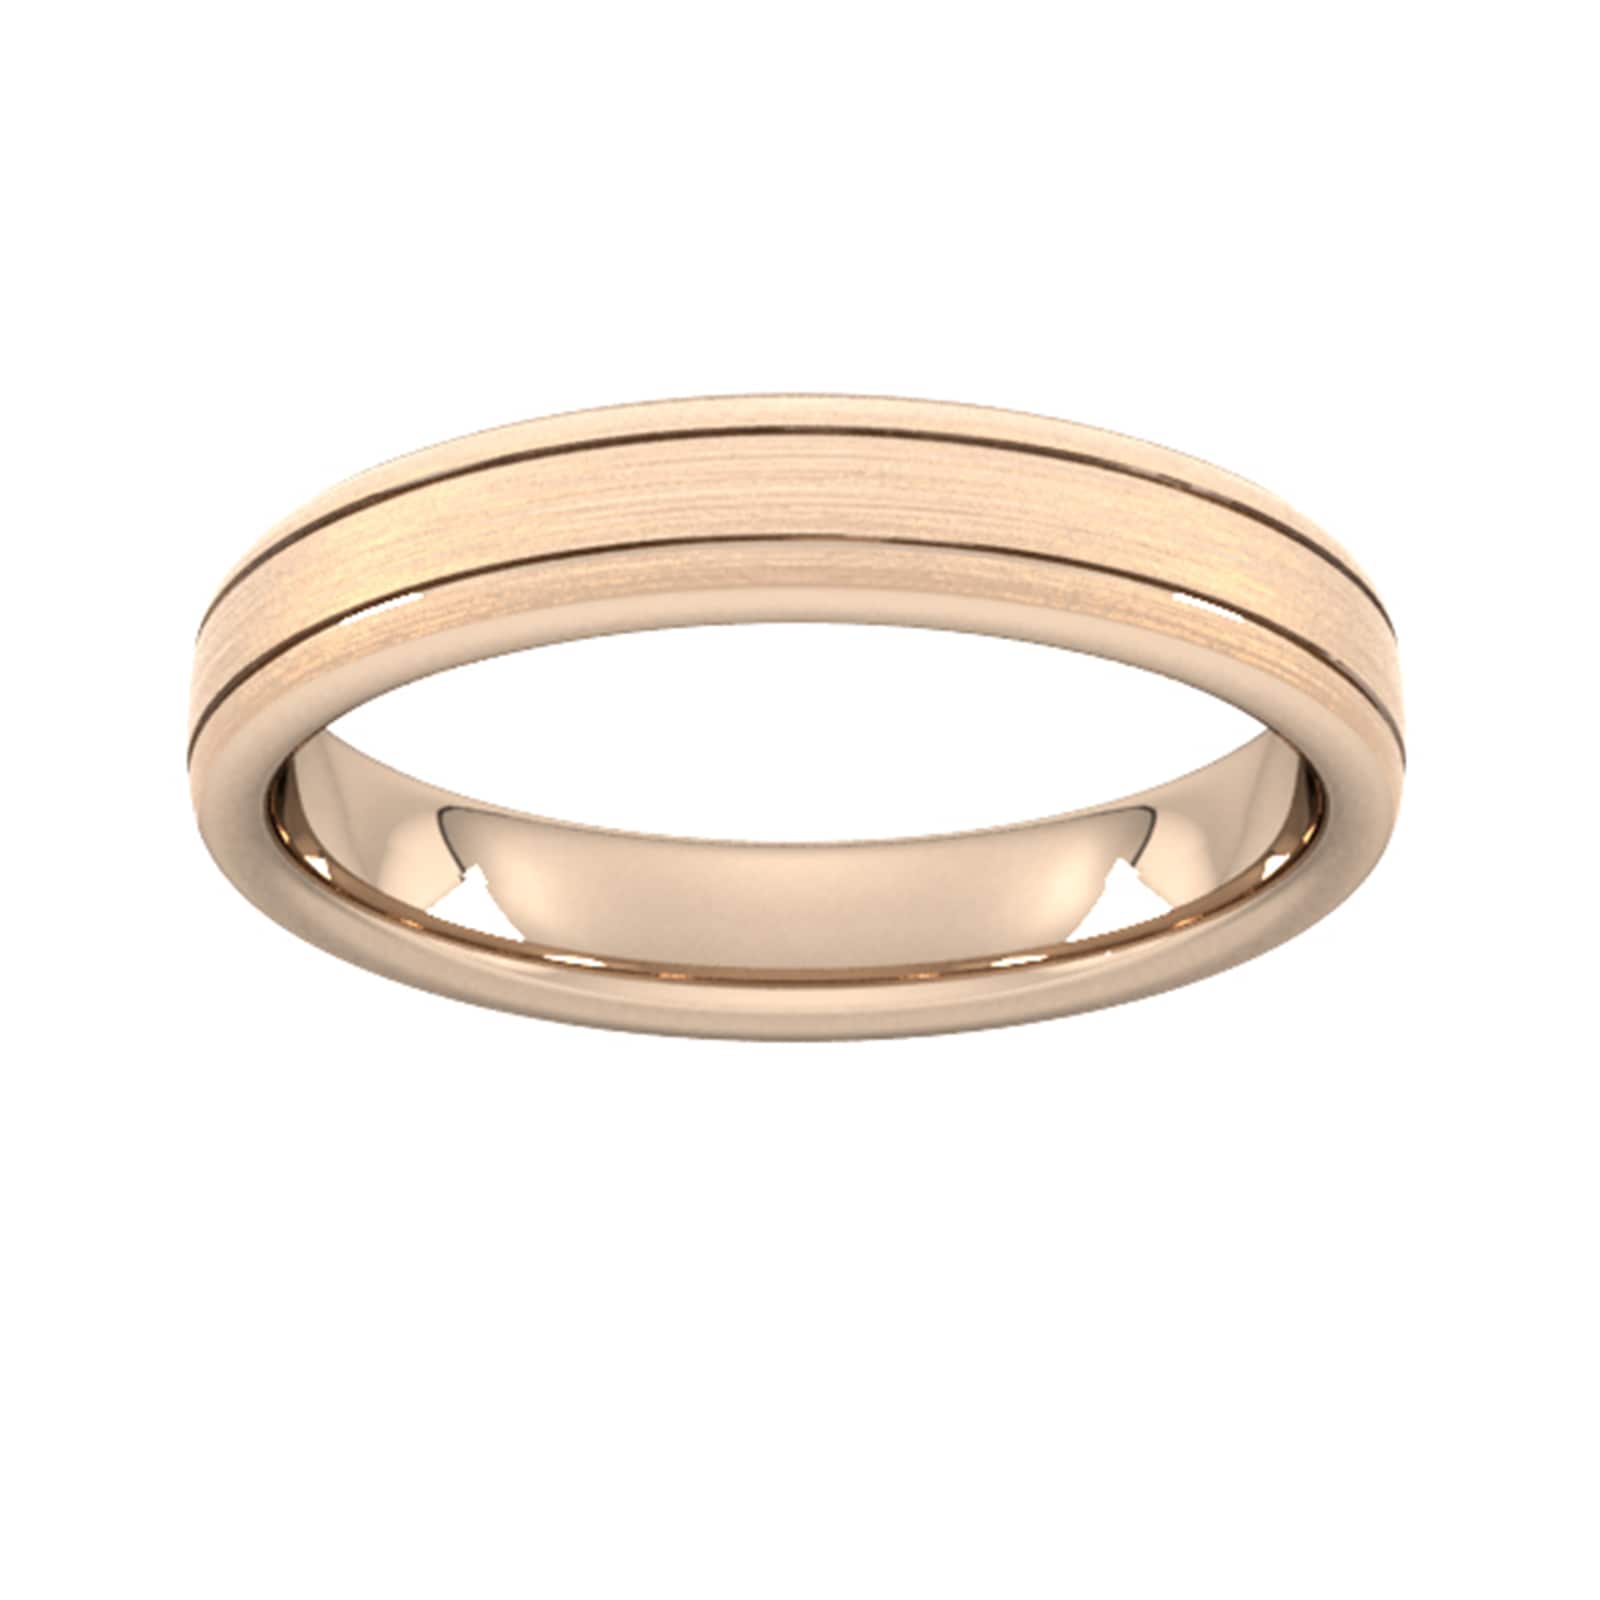 4mm Traditional Court Heavy Matt Finish With Double Grooves Wedding Ring In 9 Carat Rose Gold - Ring Size S